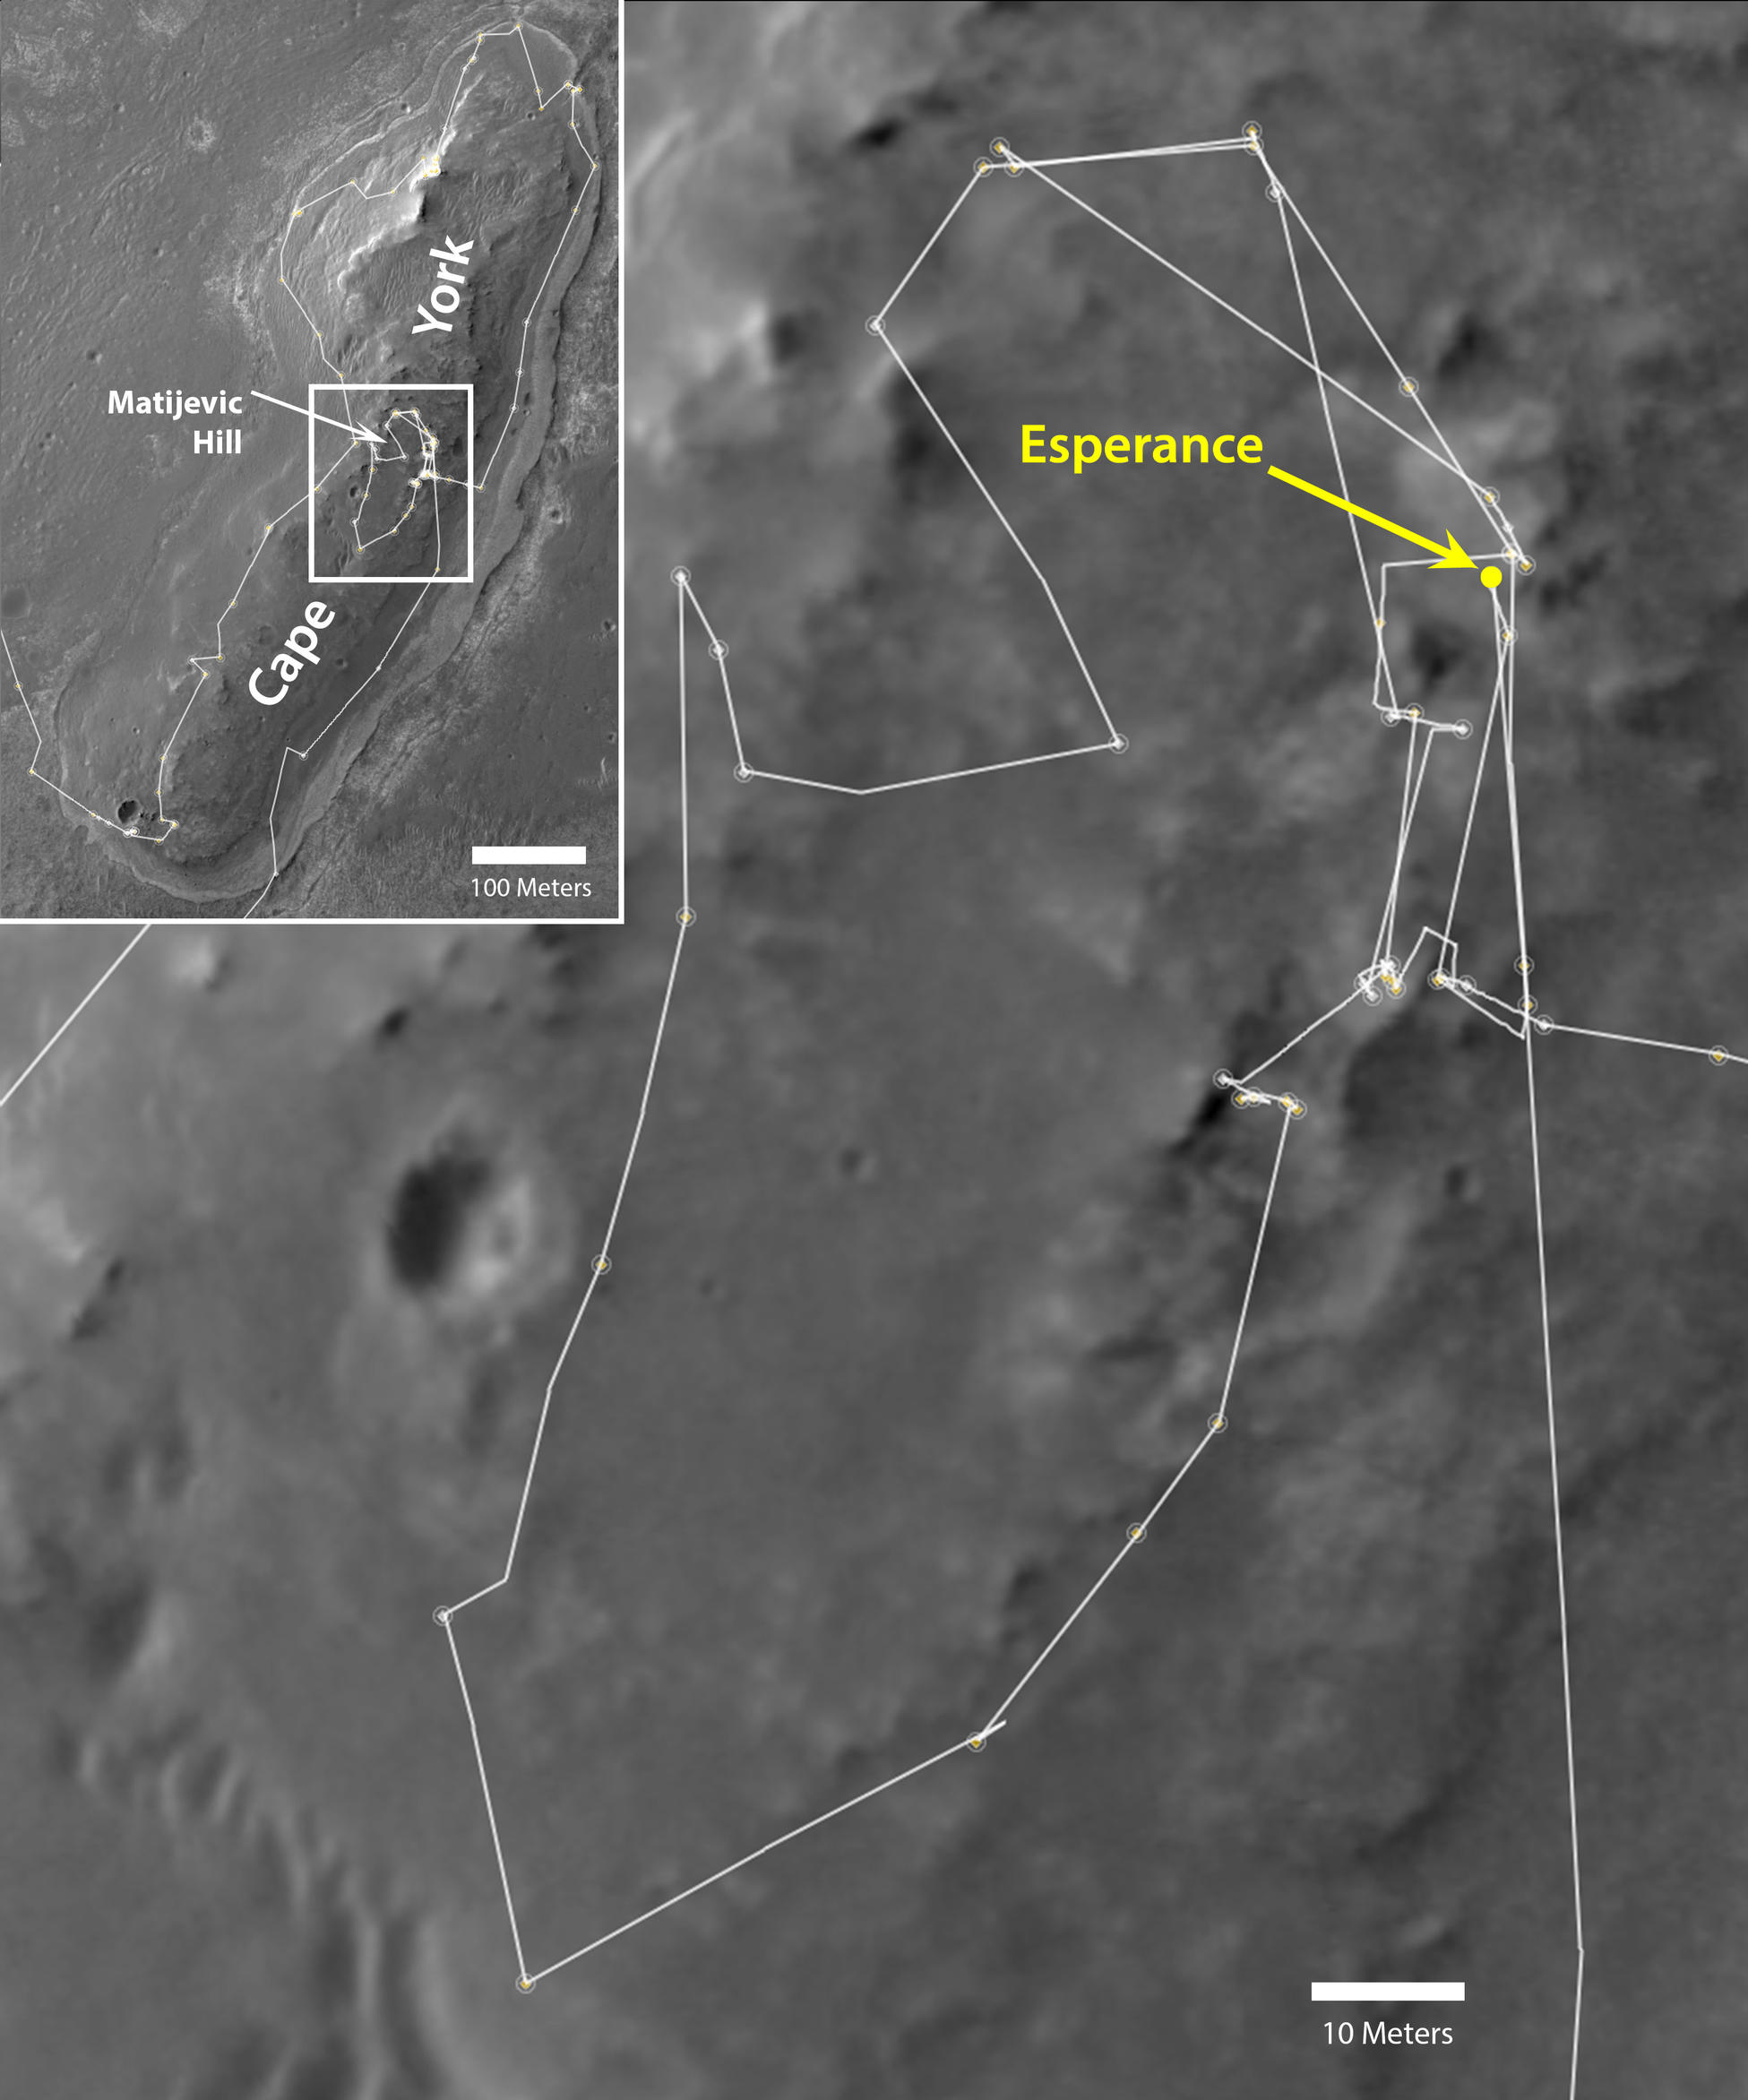 NASA's Mars Exploration Rover Opportunity drove onto the "Cape York" segment of the rim of Endeavour Crater in August 2011 and departed Cape York in May 2013.